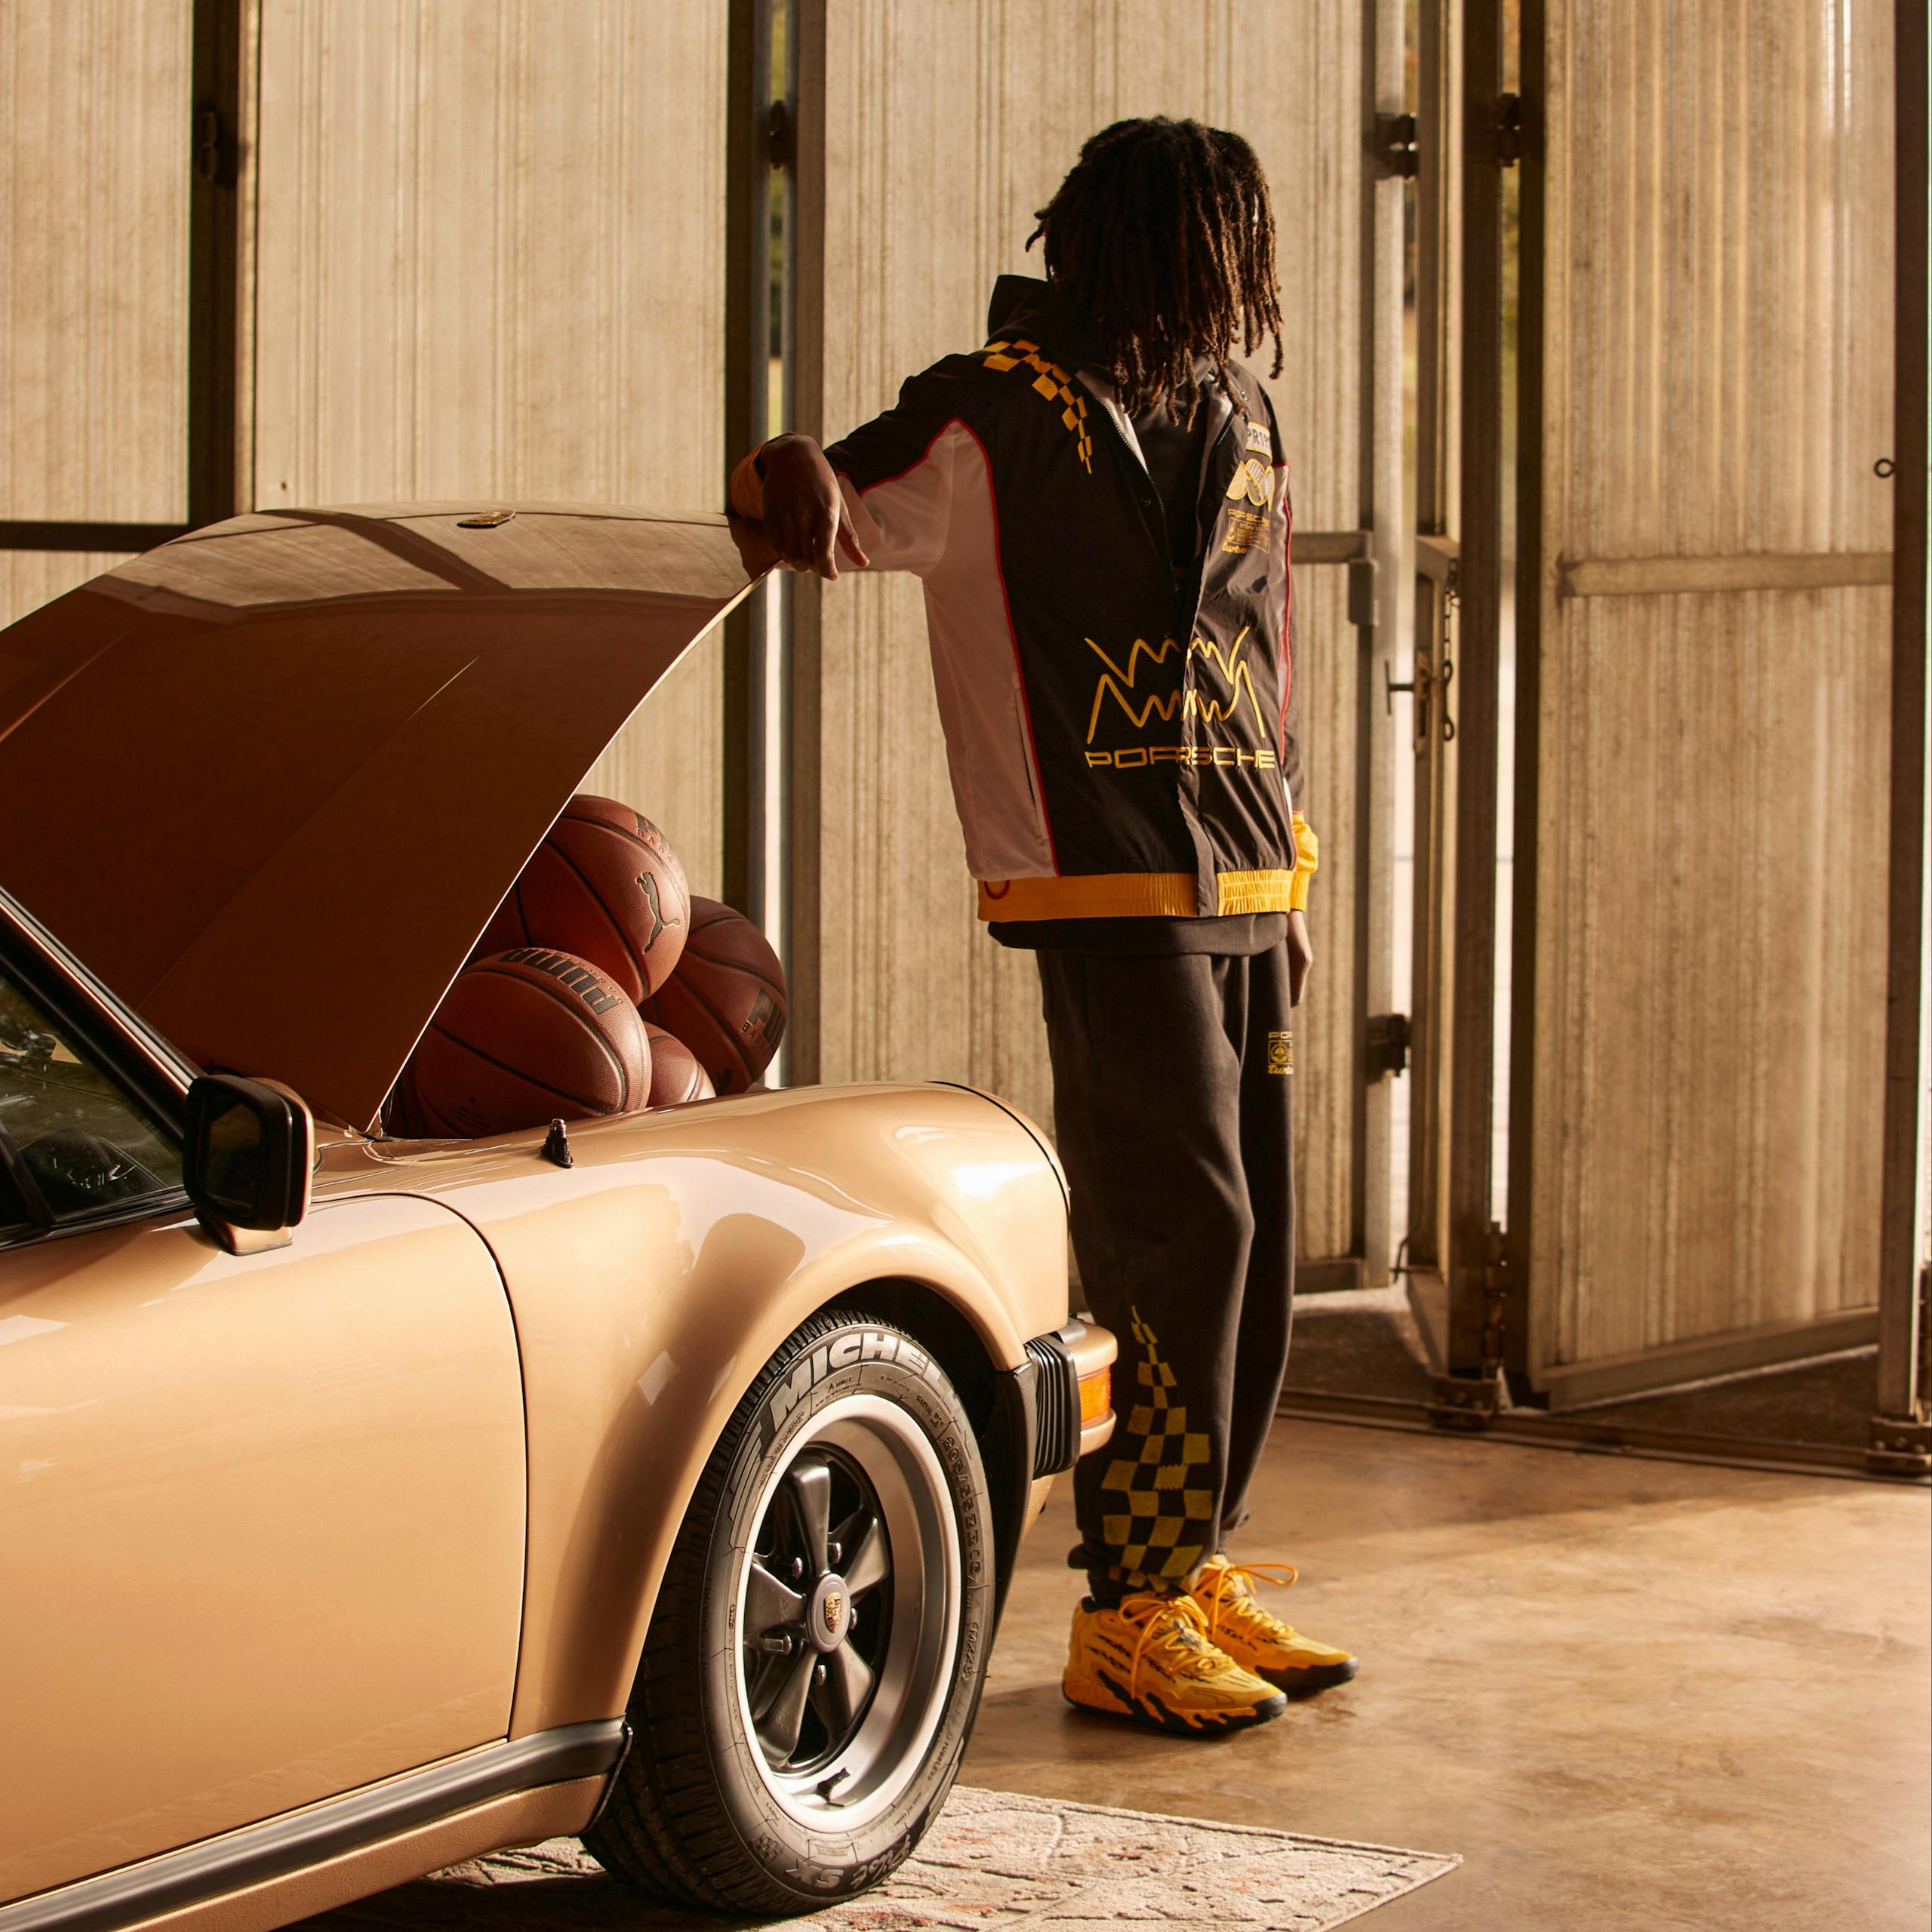 Porsche Puma. Image features man standing in front of a Porsche 911 Turbo, with the front truck open and basketballs inside. 